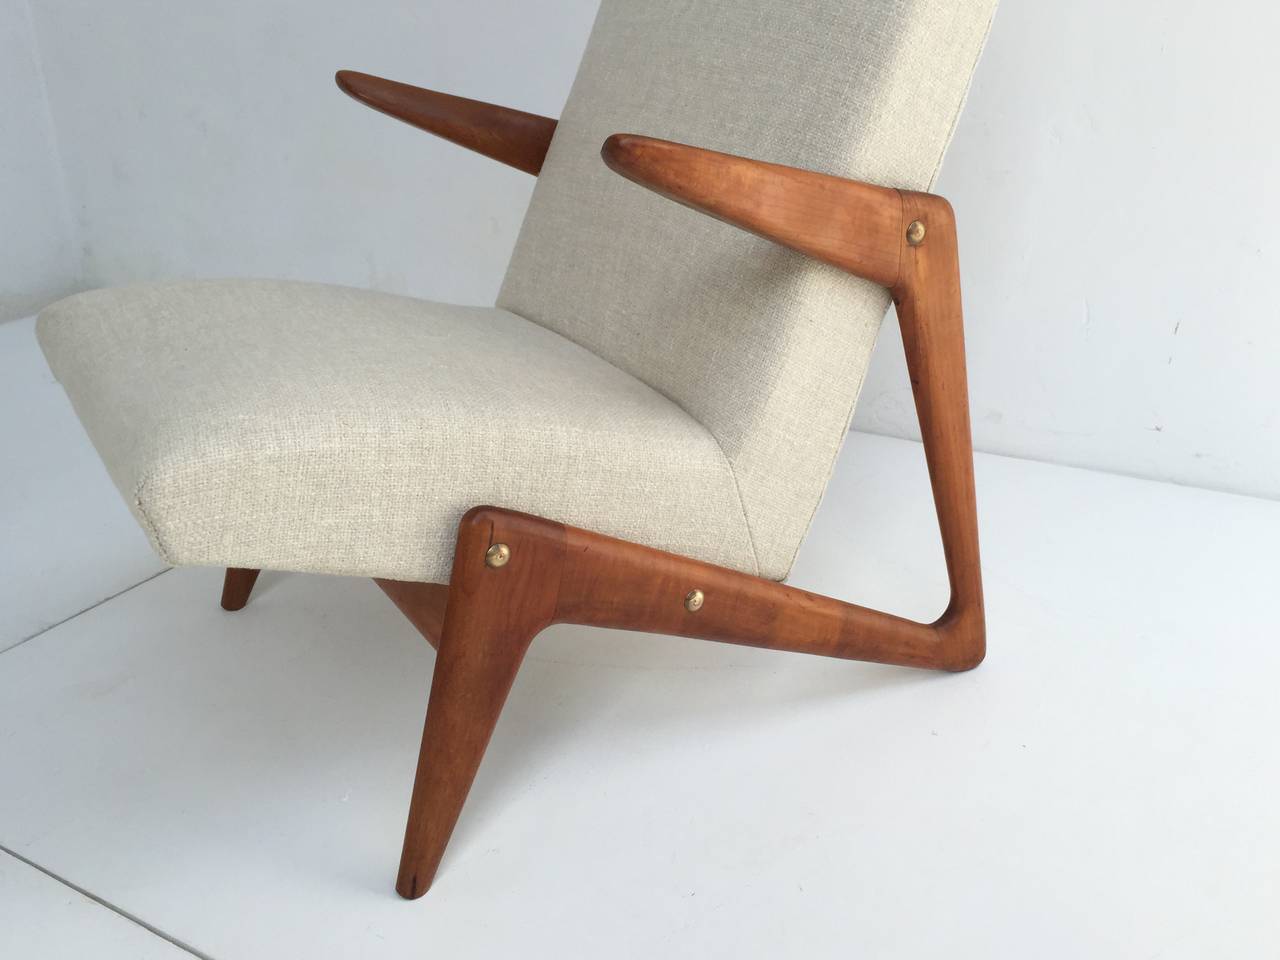 A stunning pair of early 1950s Belgian lounge chair with organic sculptural form carved walnut frame and brass hardware. 

This chair is often attributed to Belgian designer Alfred Hendrickx who was very inspired by the designs of Carlo Mollino